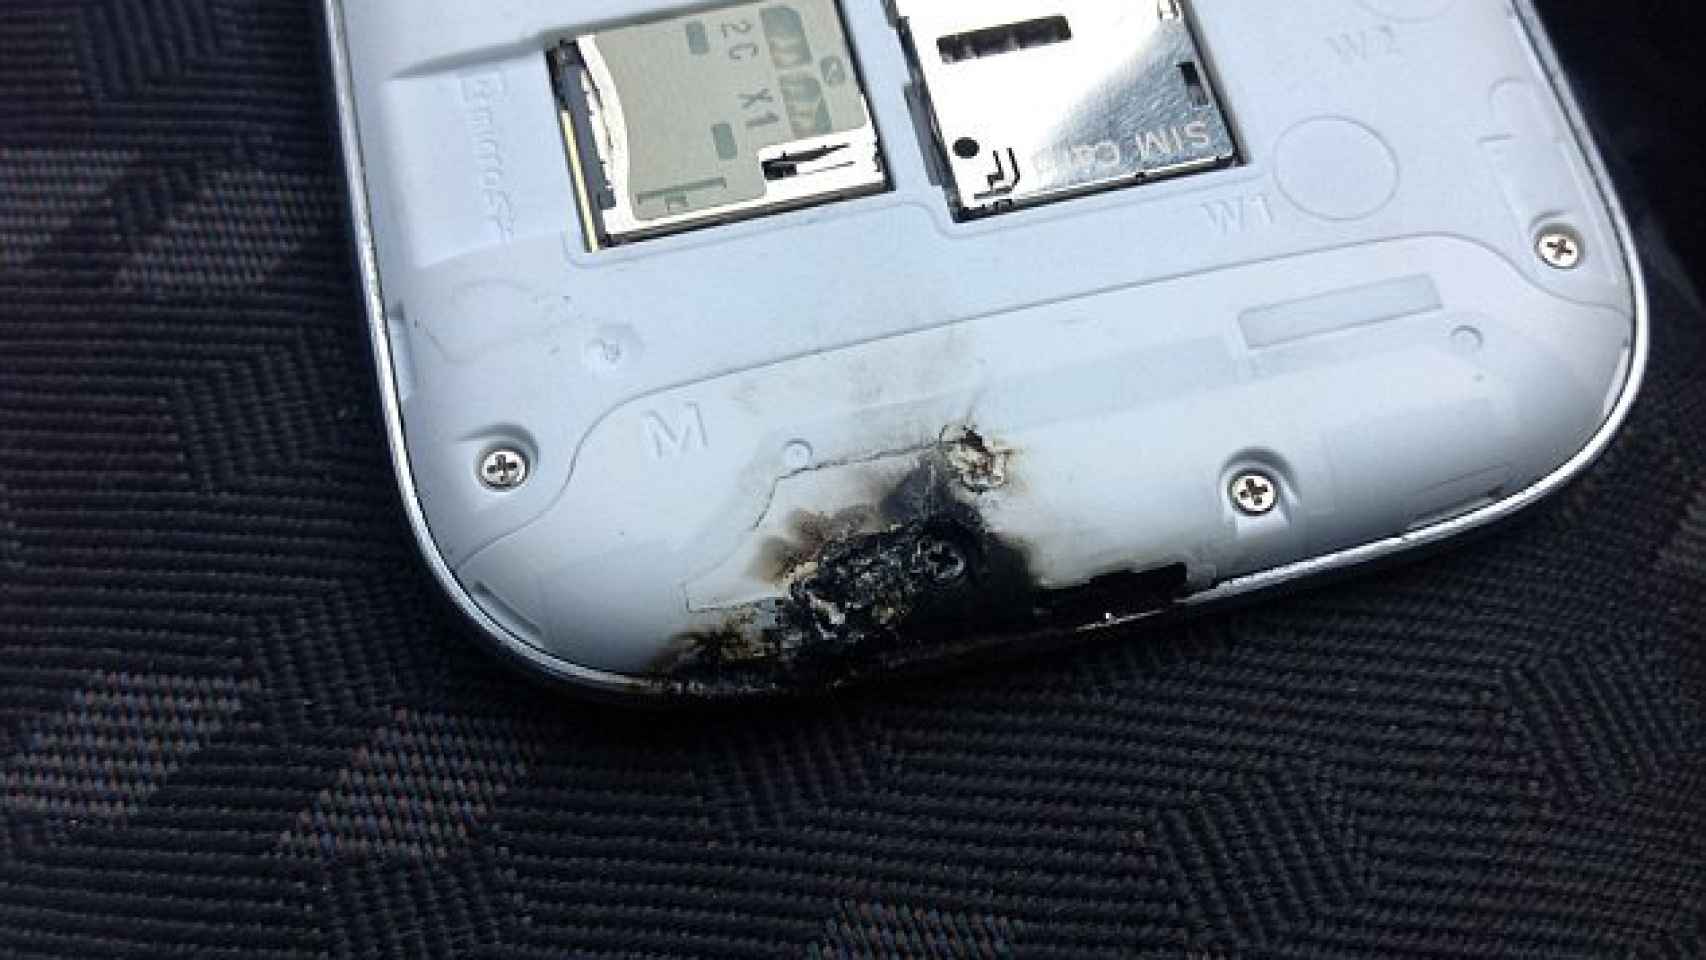 Mobile phone burned due to cable malfunction